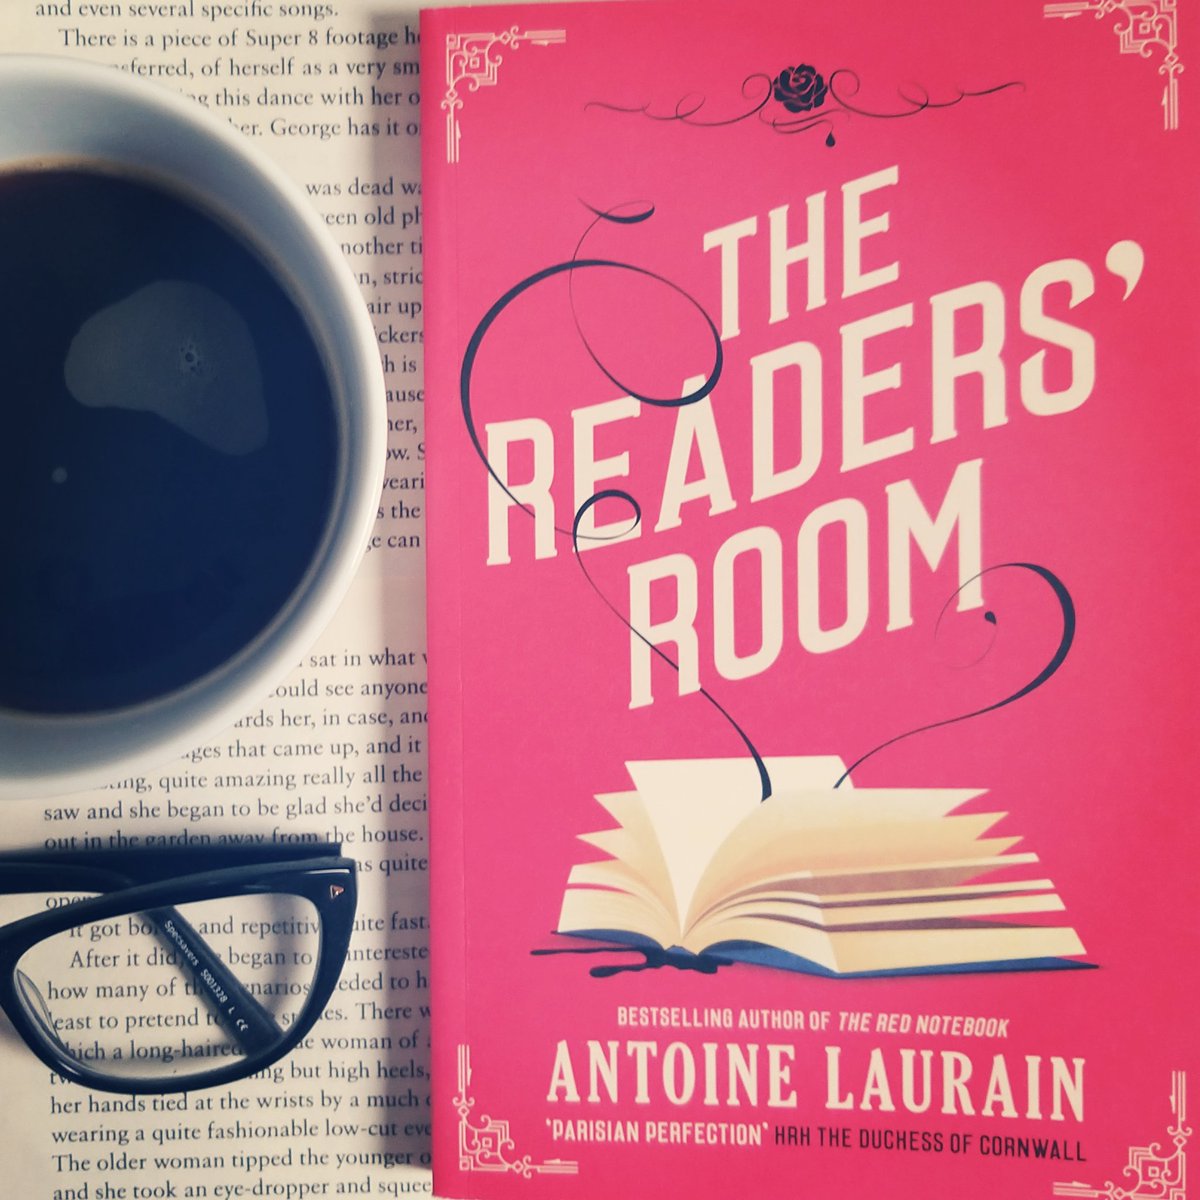 A book about books set in Paris = my literary heaven. Can't wait to start #TheReadersRoom. Thanks for an advance copy @BelgraviaB #NewBooks #BookReviewer #BookBlog